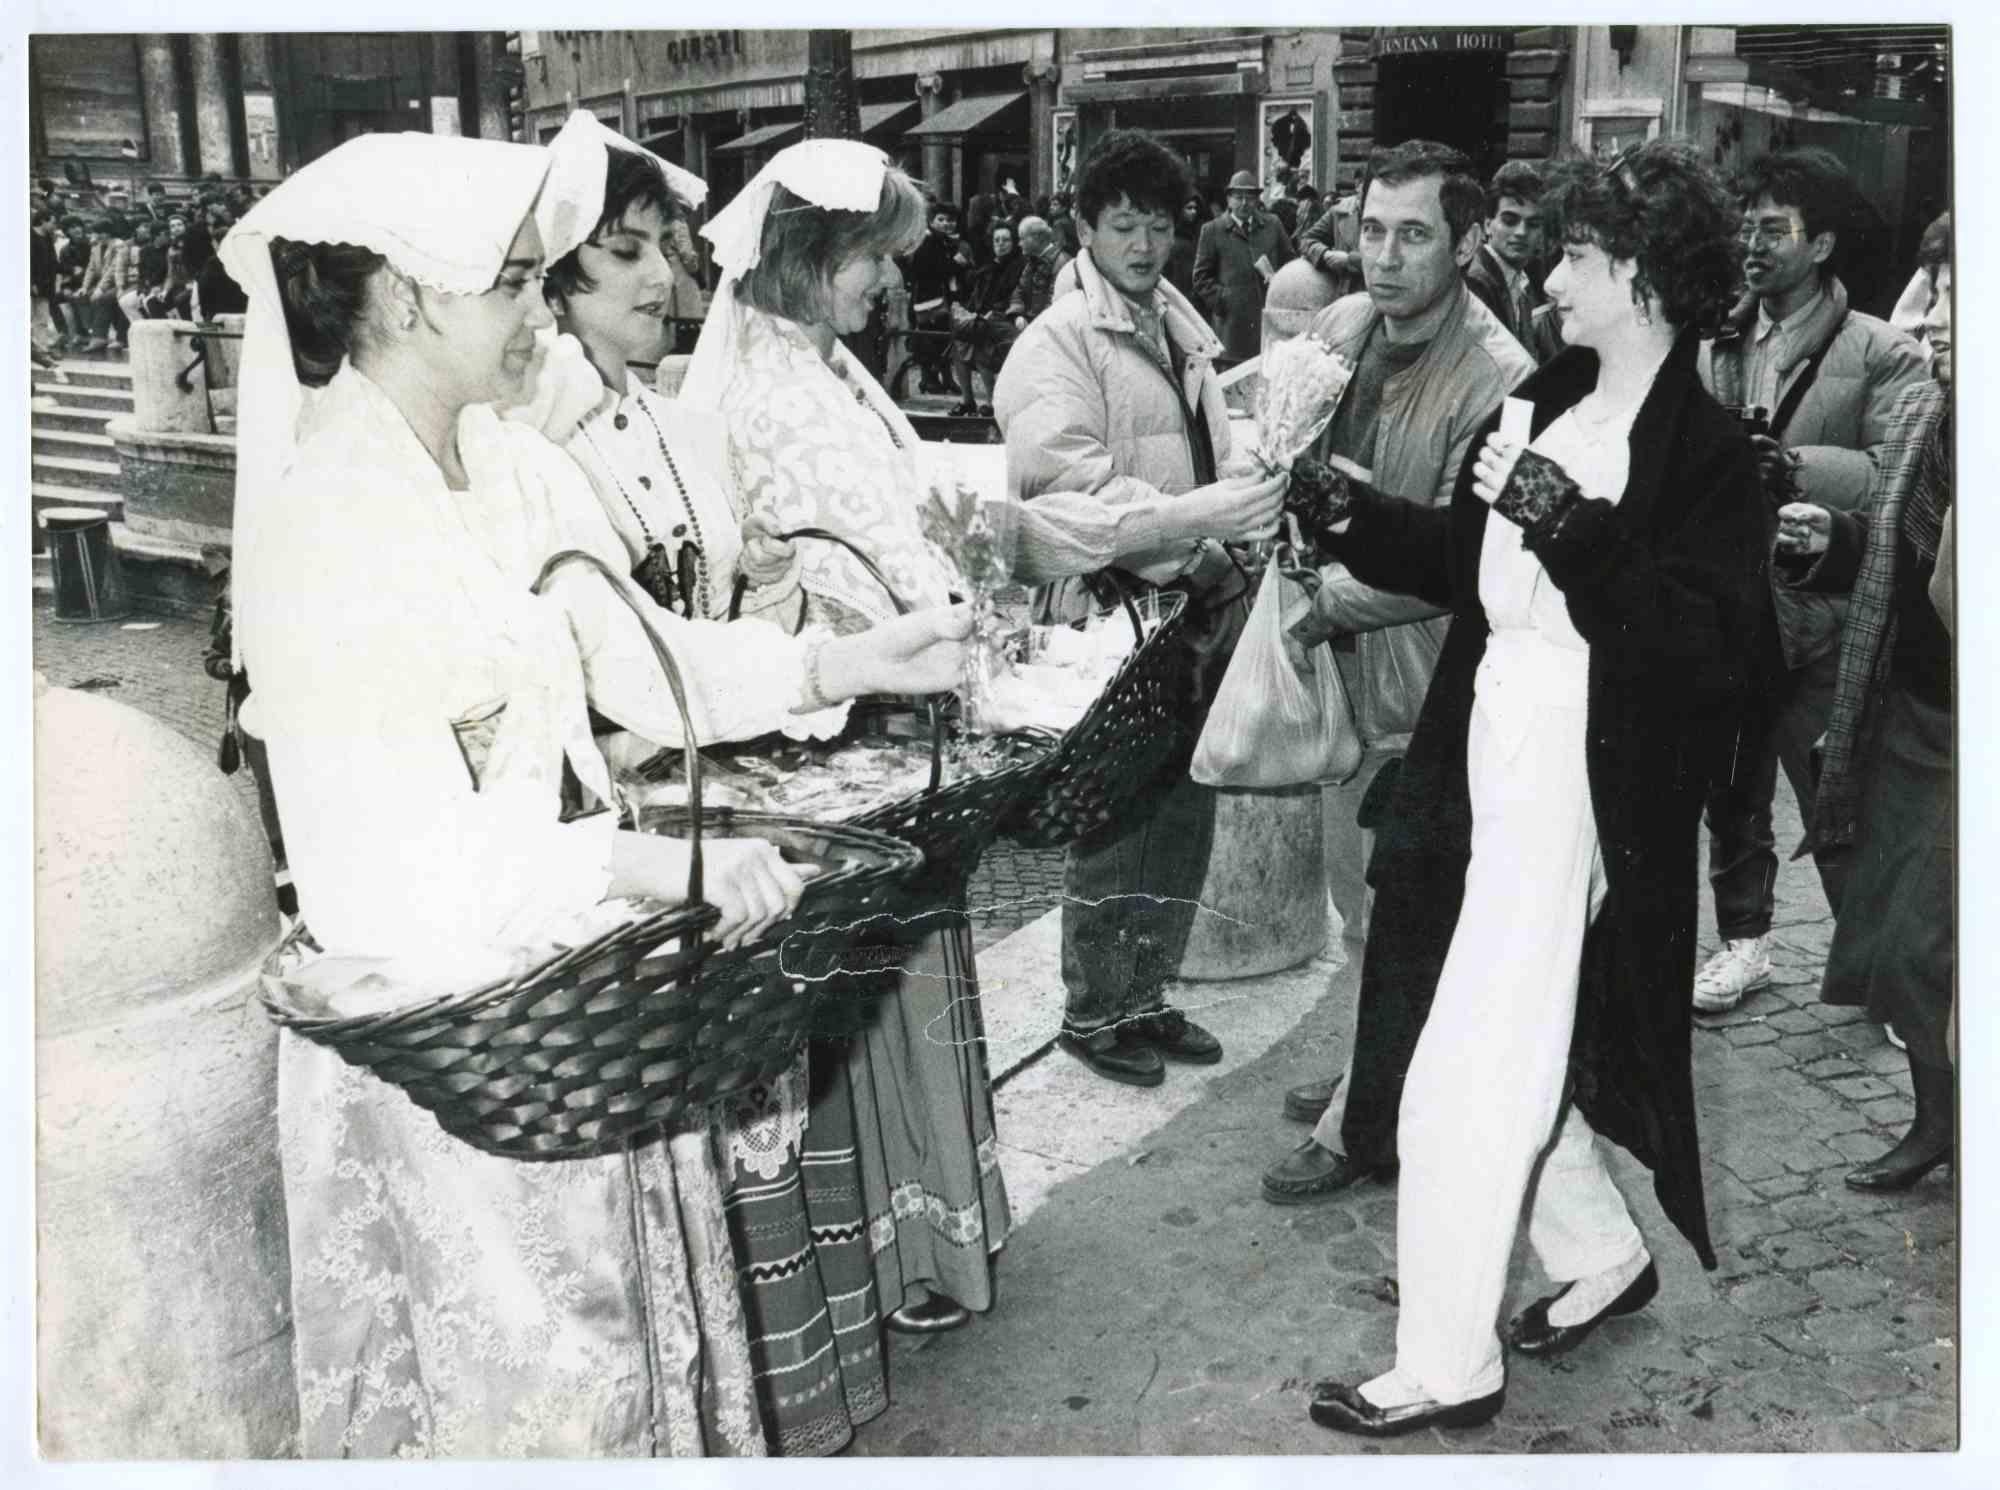 Unknown Black and White Photograph - The Feast - Historical Photograph About the Feminist Movement - 1980s